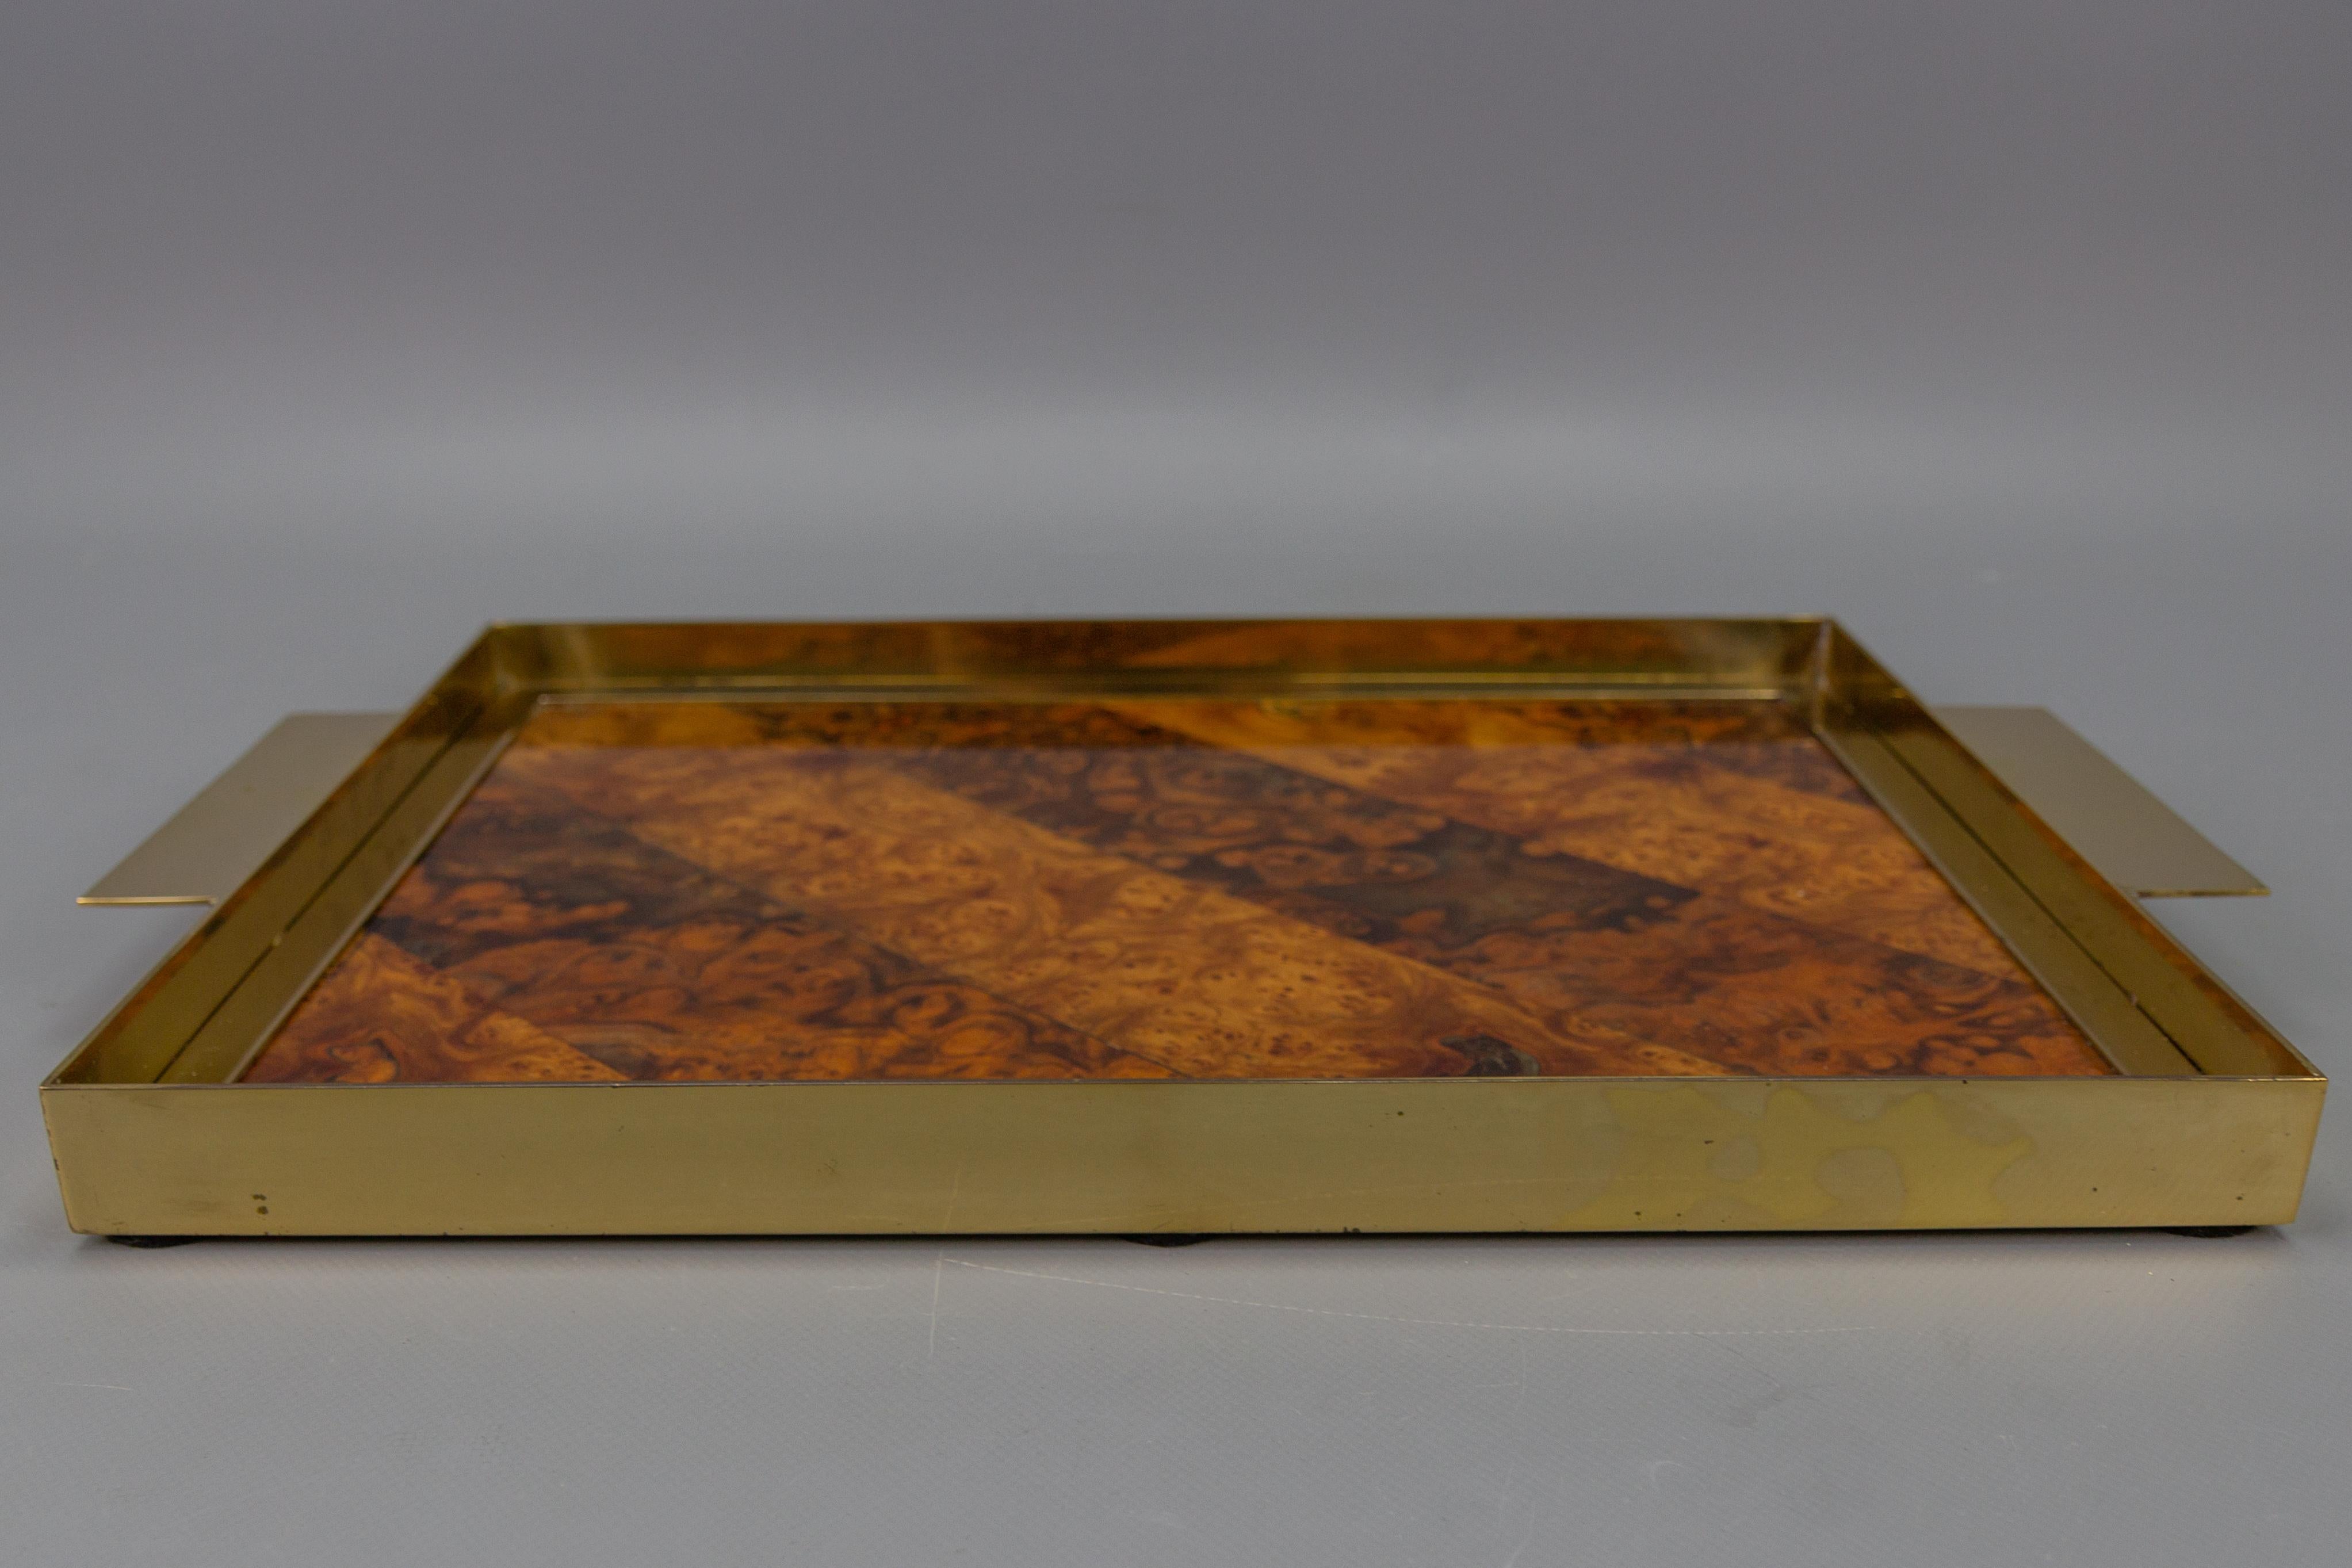 Mid-Century brass, plywood, and veneer serving tray, Italy, circa the 1960s.
An elegant serving tray from the Mid-Century Modern period, made in Italy around the 1960s. 
The tray features a base made of plywood and veneer, creating a burr wood